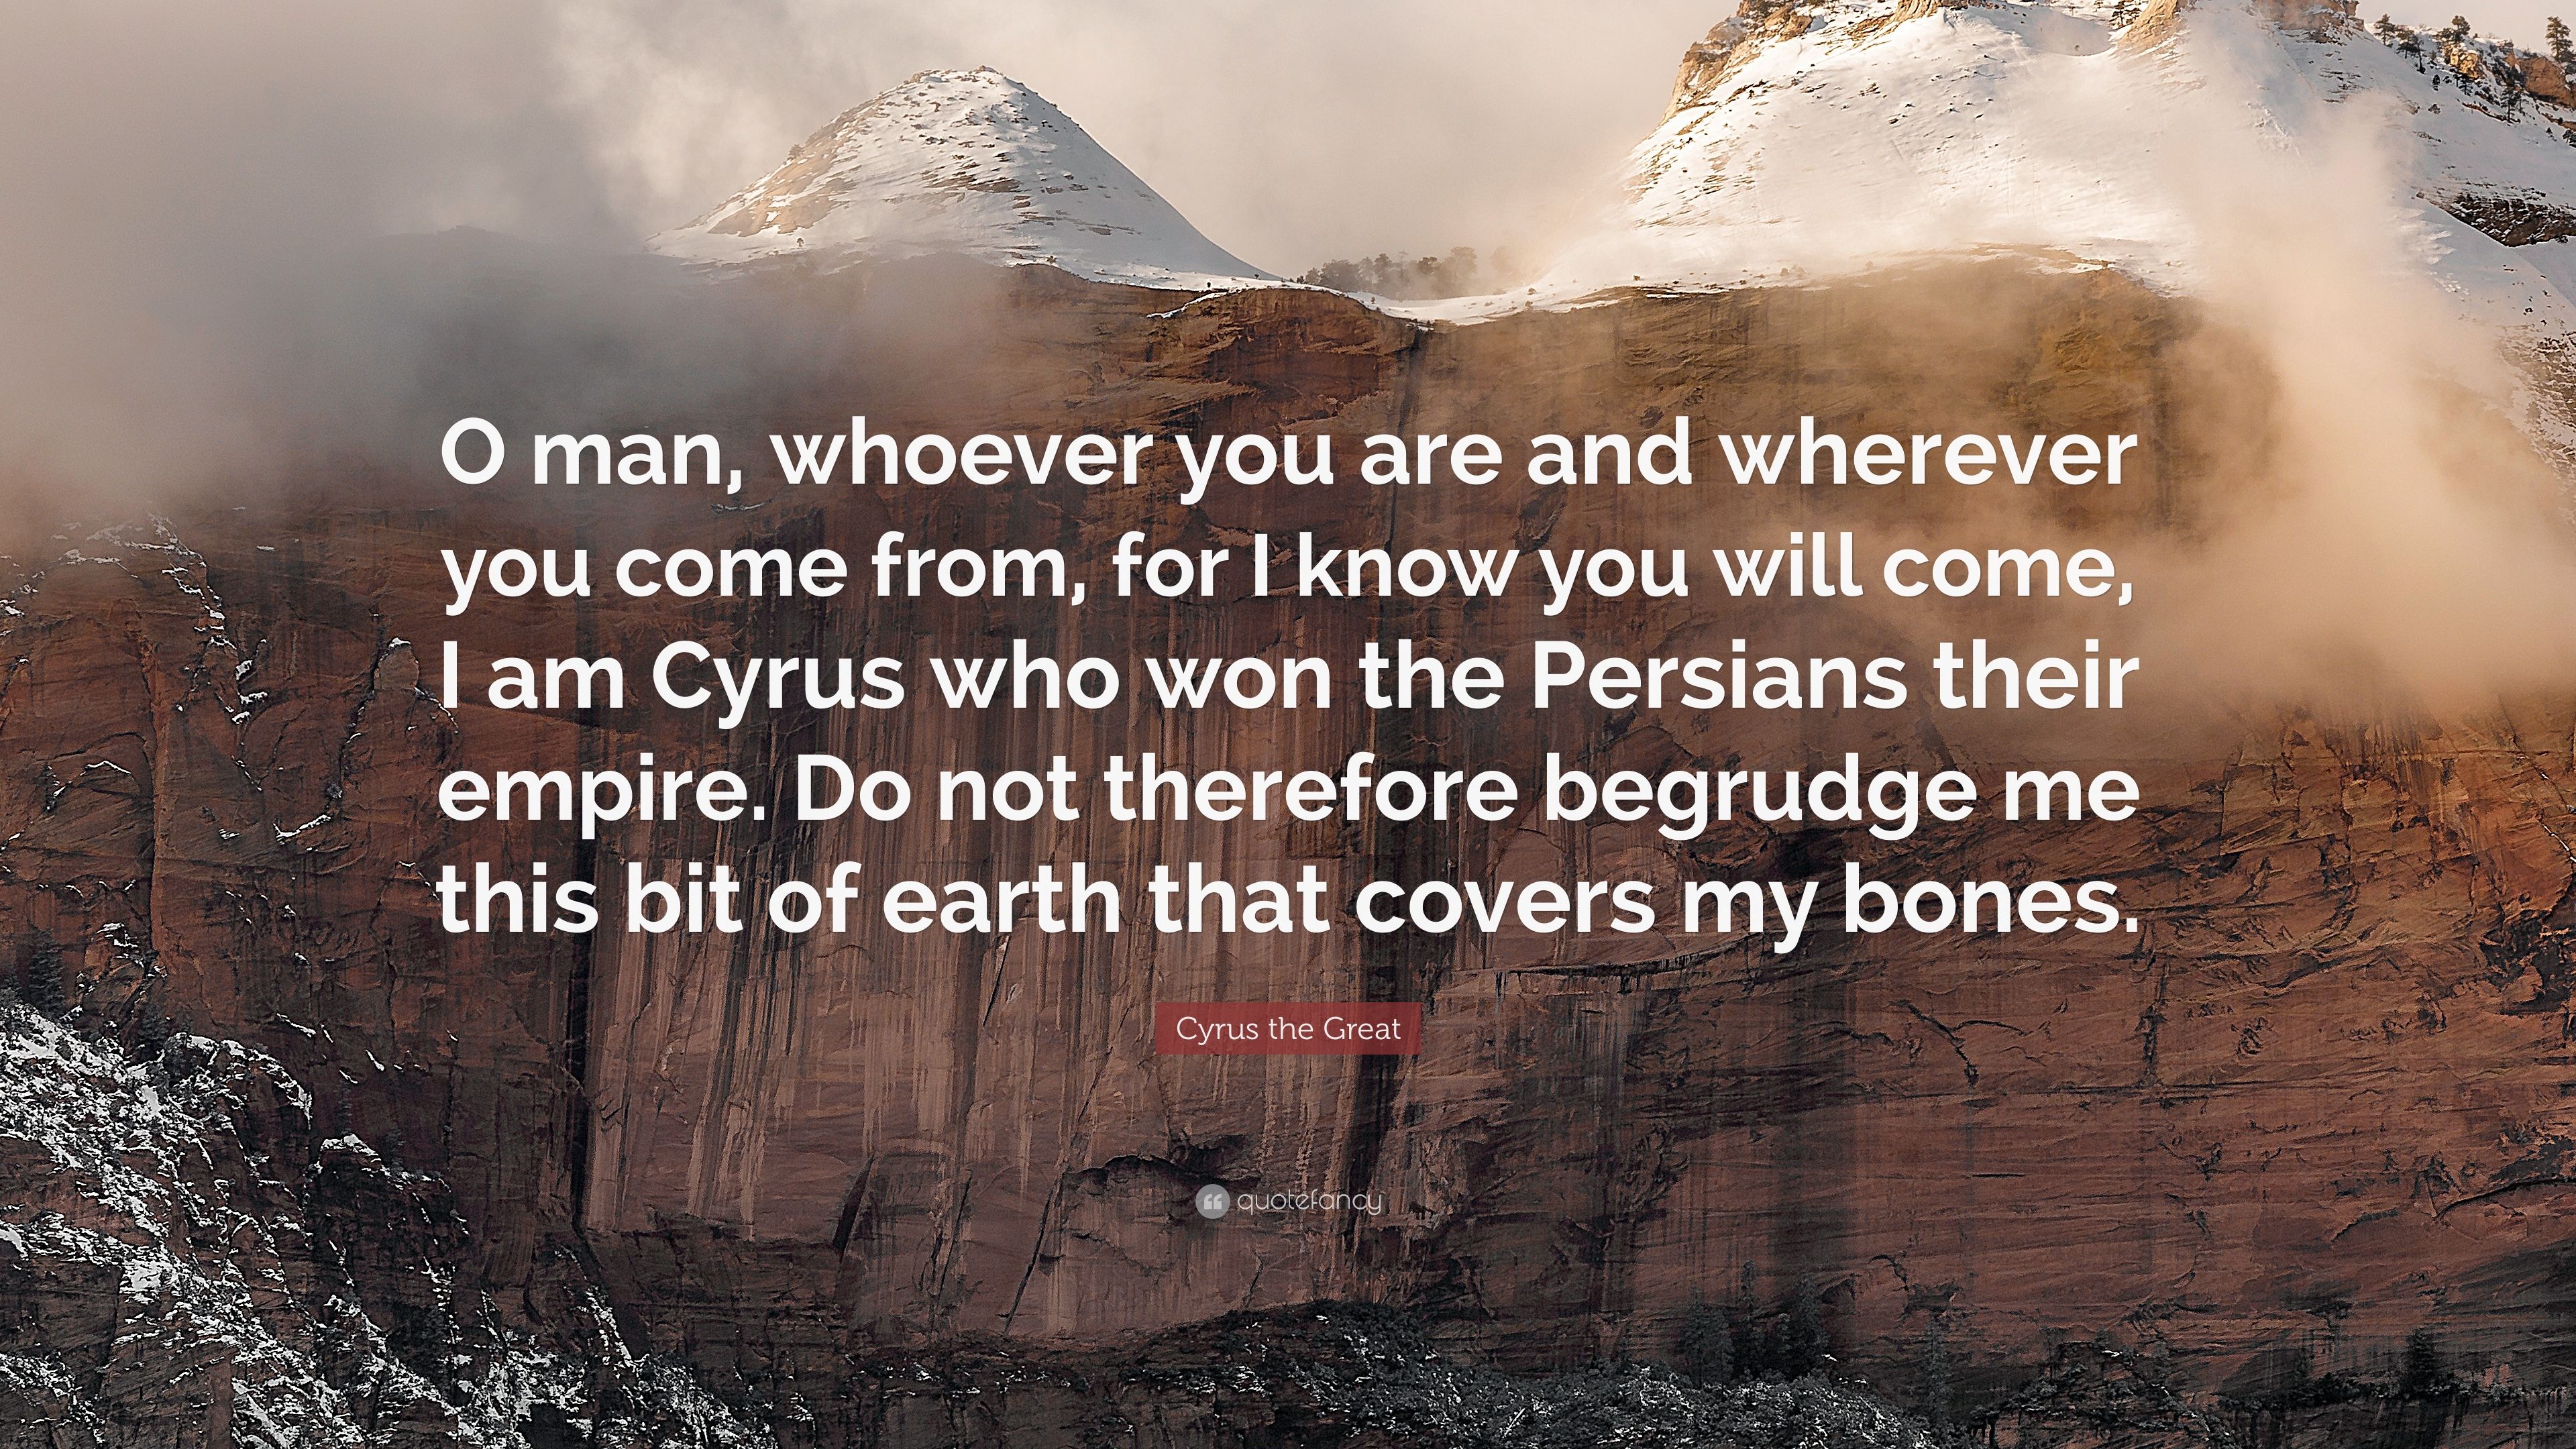 Cyrus the Great Quote: “O man, whoever you are and wherever you